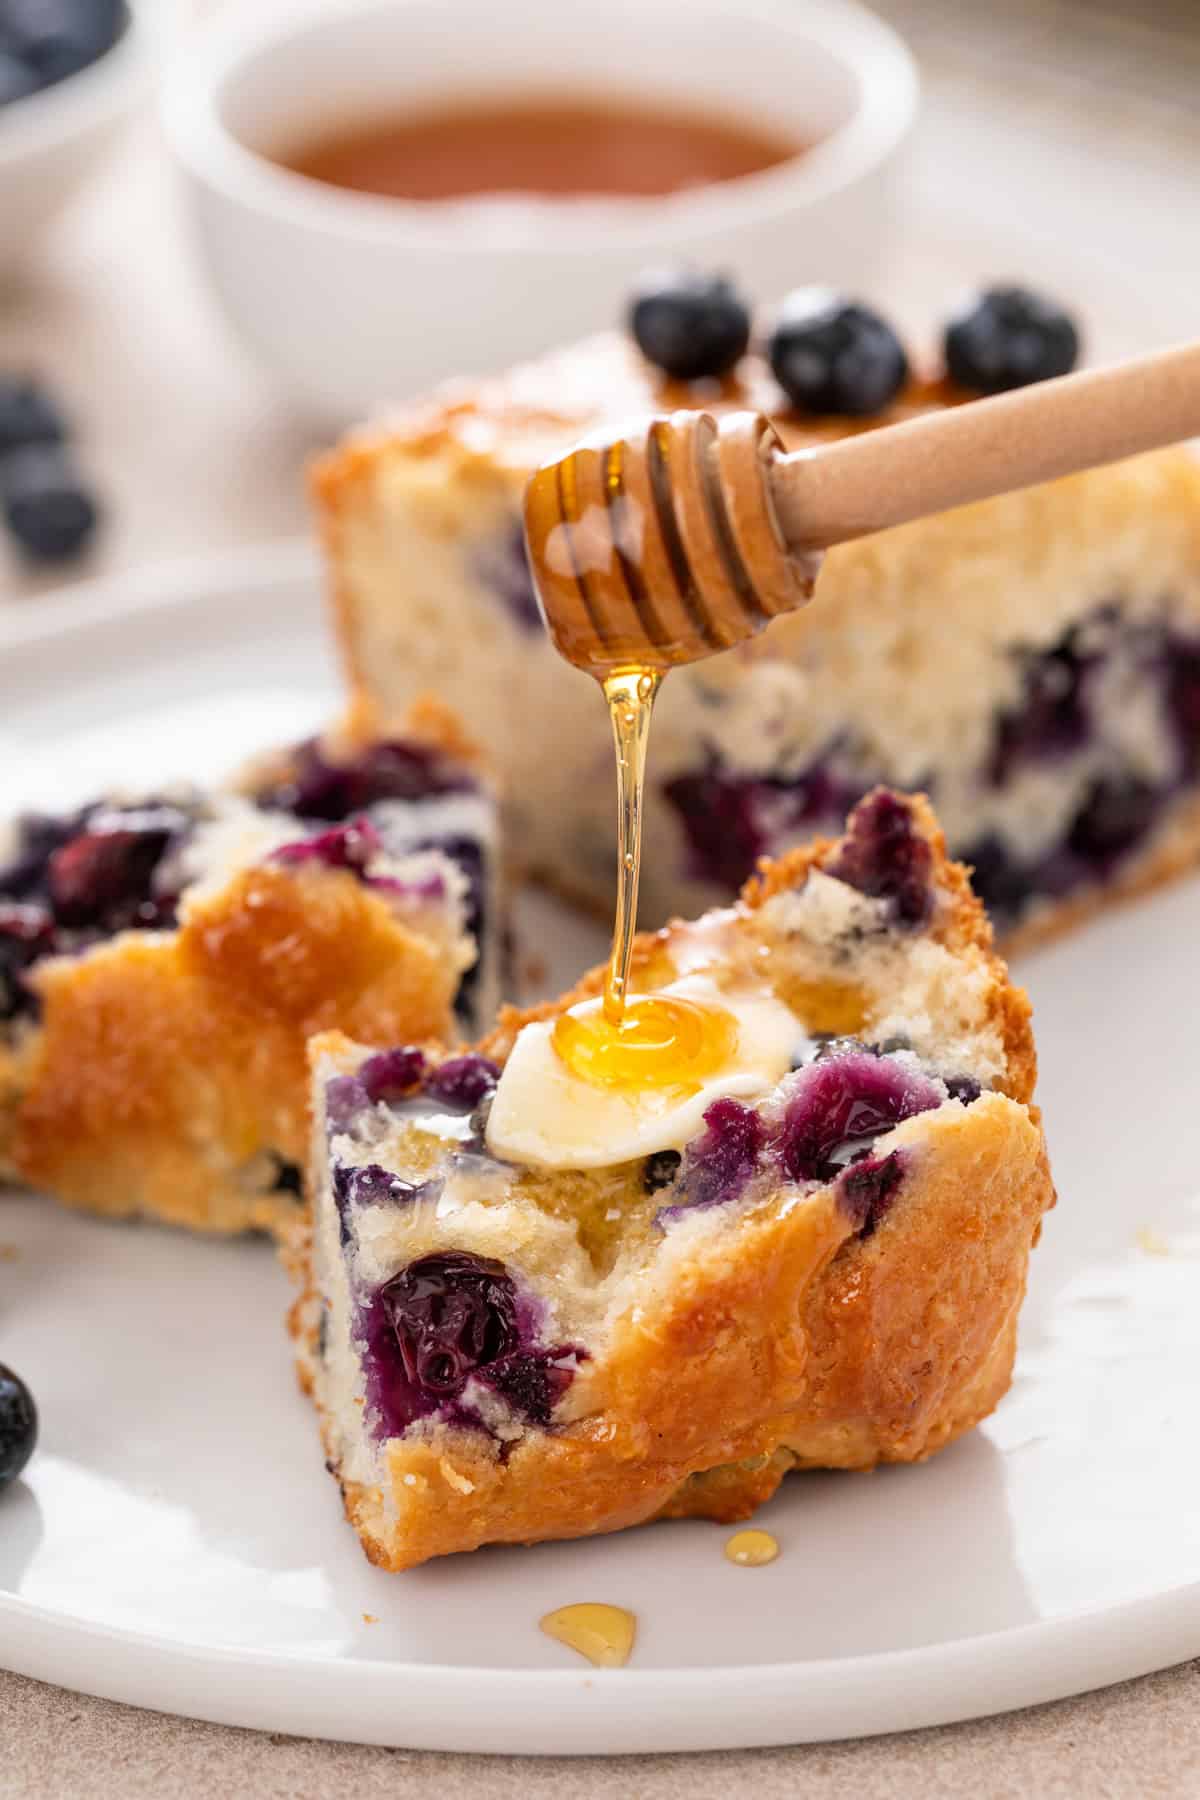 Honey being drizzled over half of a blueberry biscuit on a white plate.